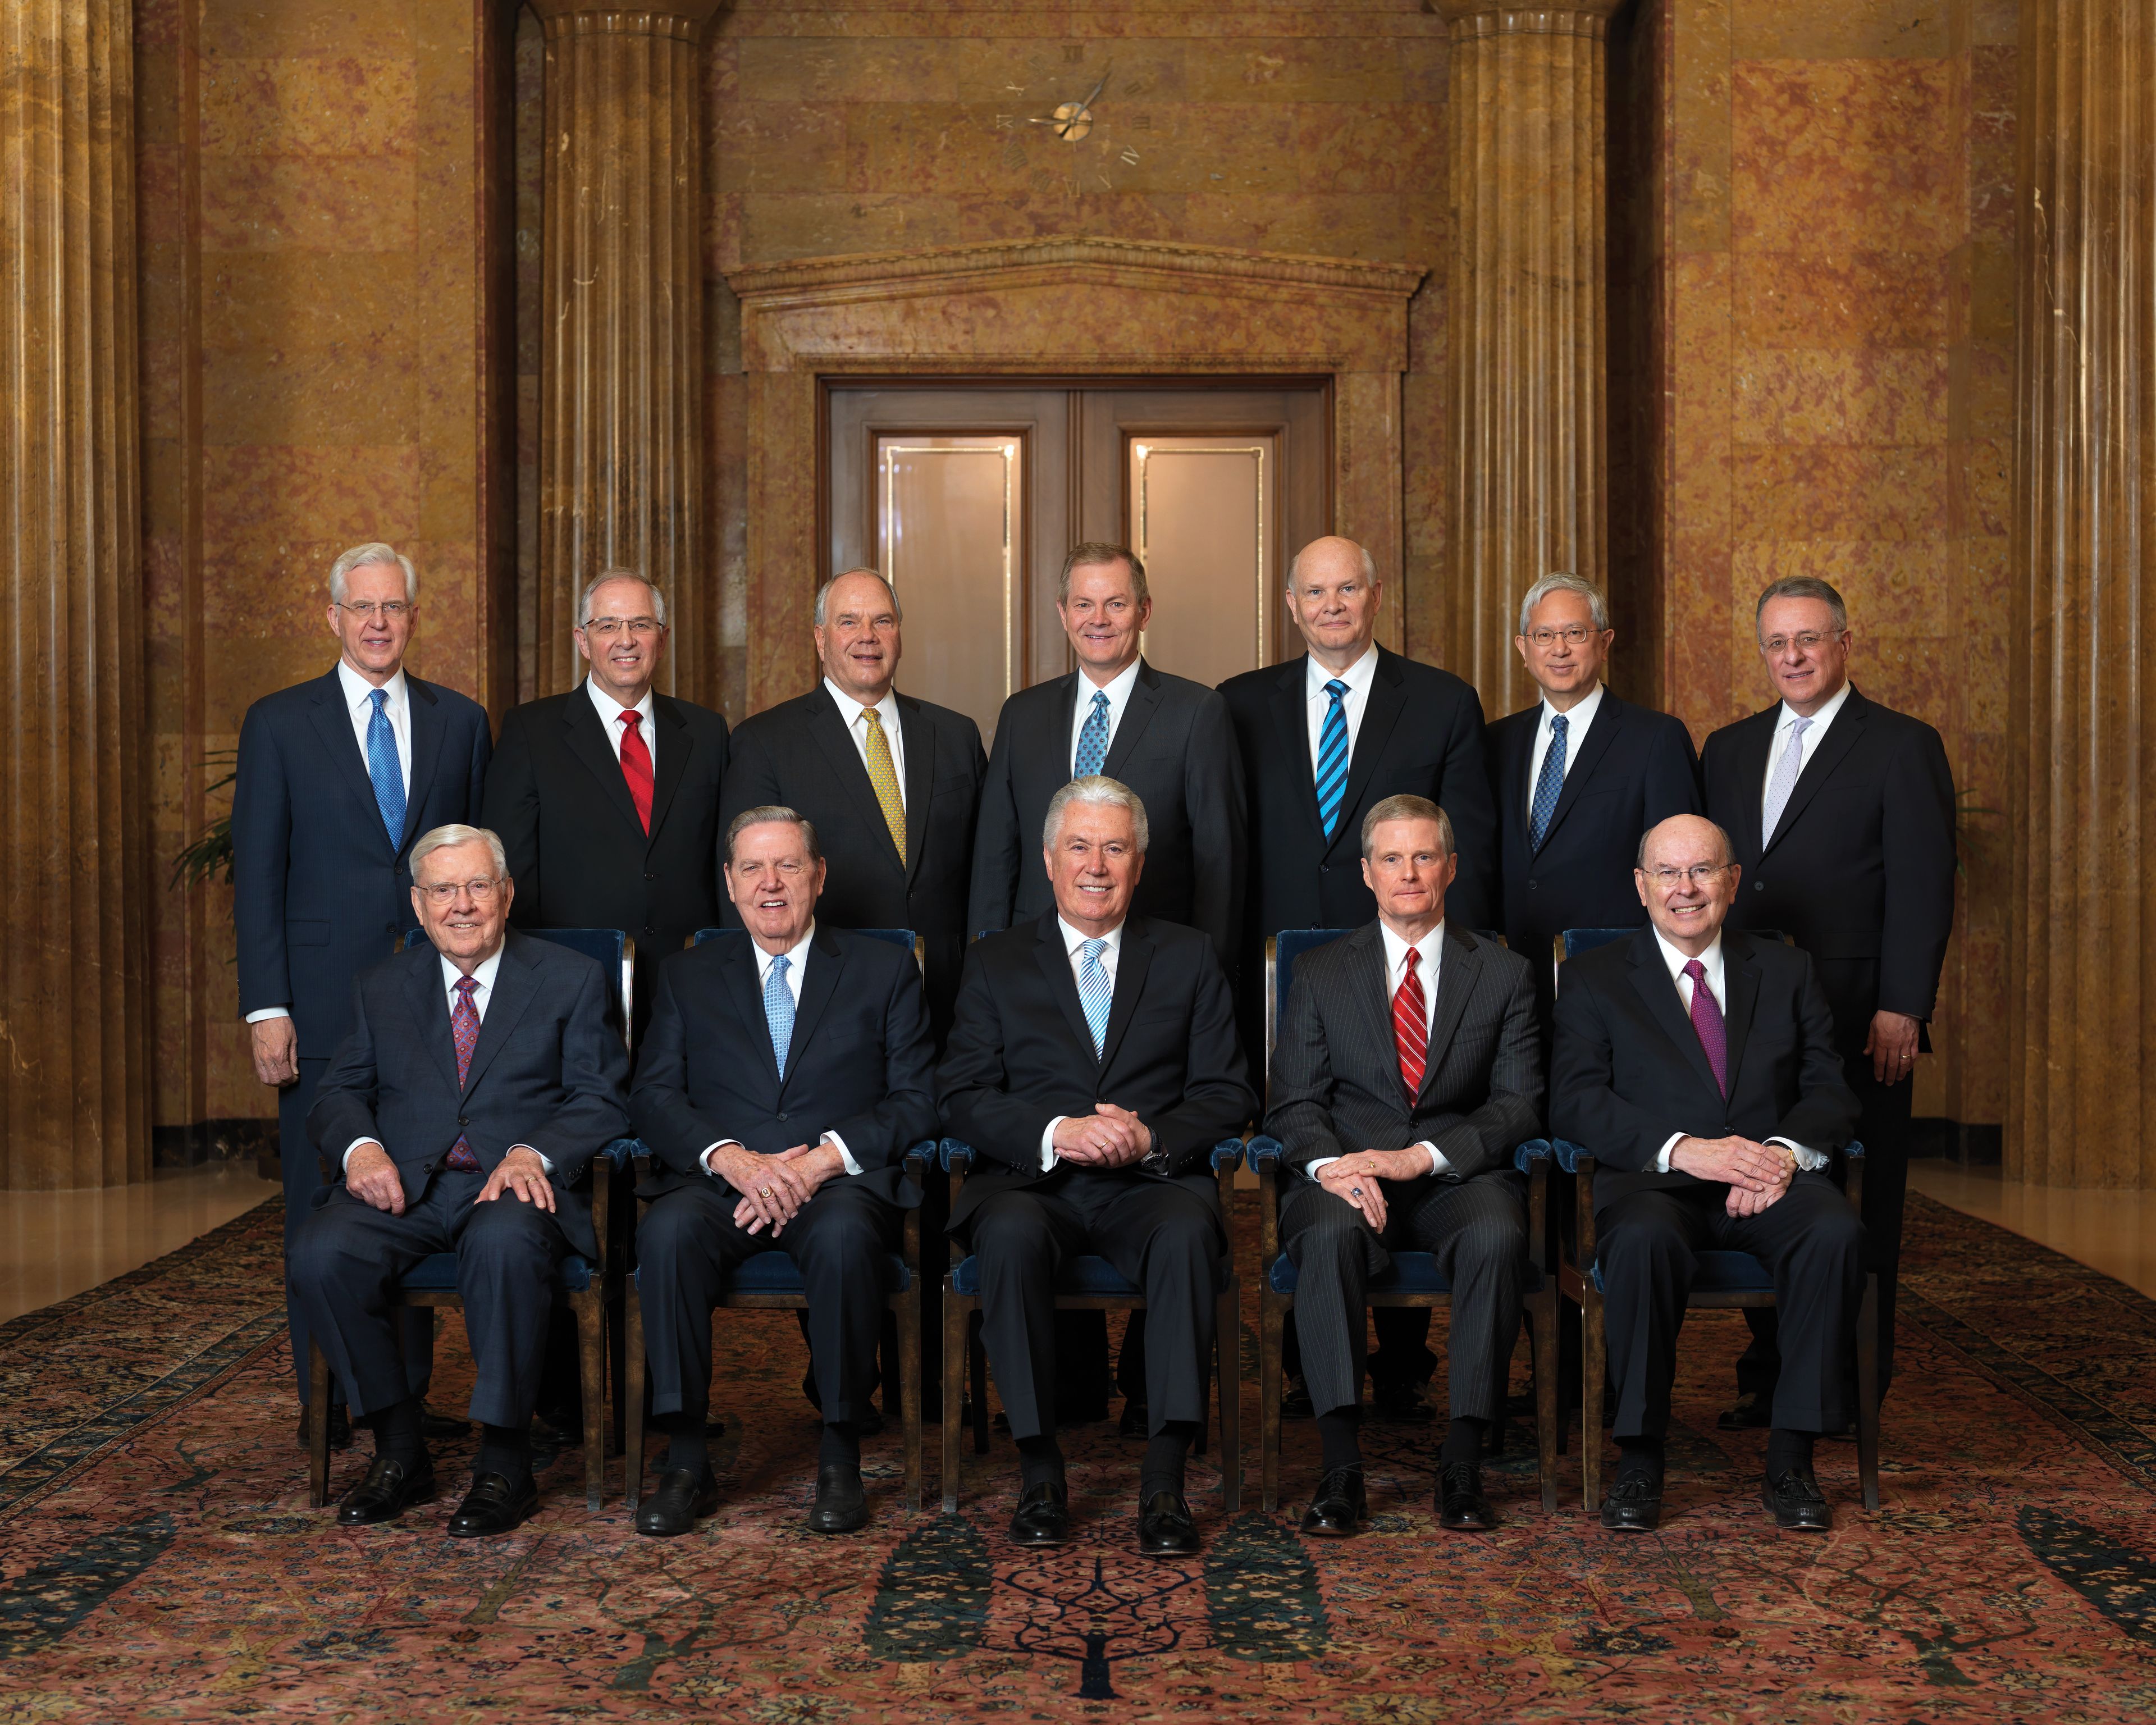 The official group portrait of the Quorum of the Twelve Apostles of The Church of Jesus Christ of Latter-day Saints, photographed April 2018. Front row, left to right: President M. Russell Ballard and Elders Jeffrey R. Holland, Dieter F. Uchtdorf, David A. Bednar, and Quentin L. Cook. Back row, left to right: Elders D. Todd Christofferson, Neil L. Andersen, Ronald A. Rasband, Gary E. Stevenson, Dale G. Renlund, Gerrit W. Gong, and Ulisses Soares.